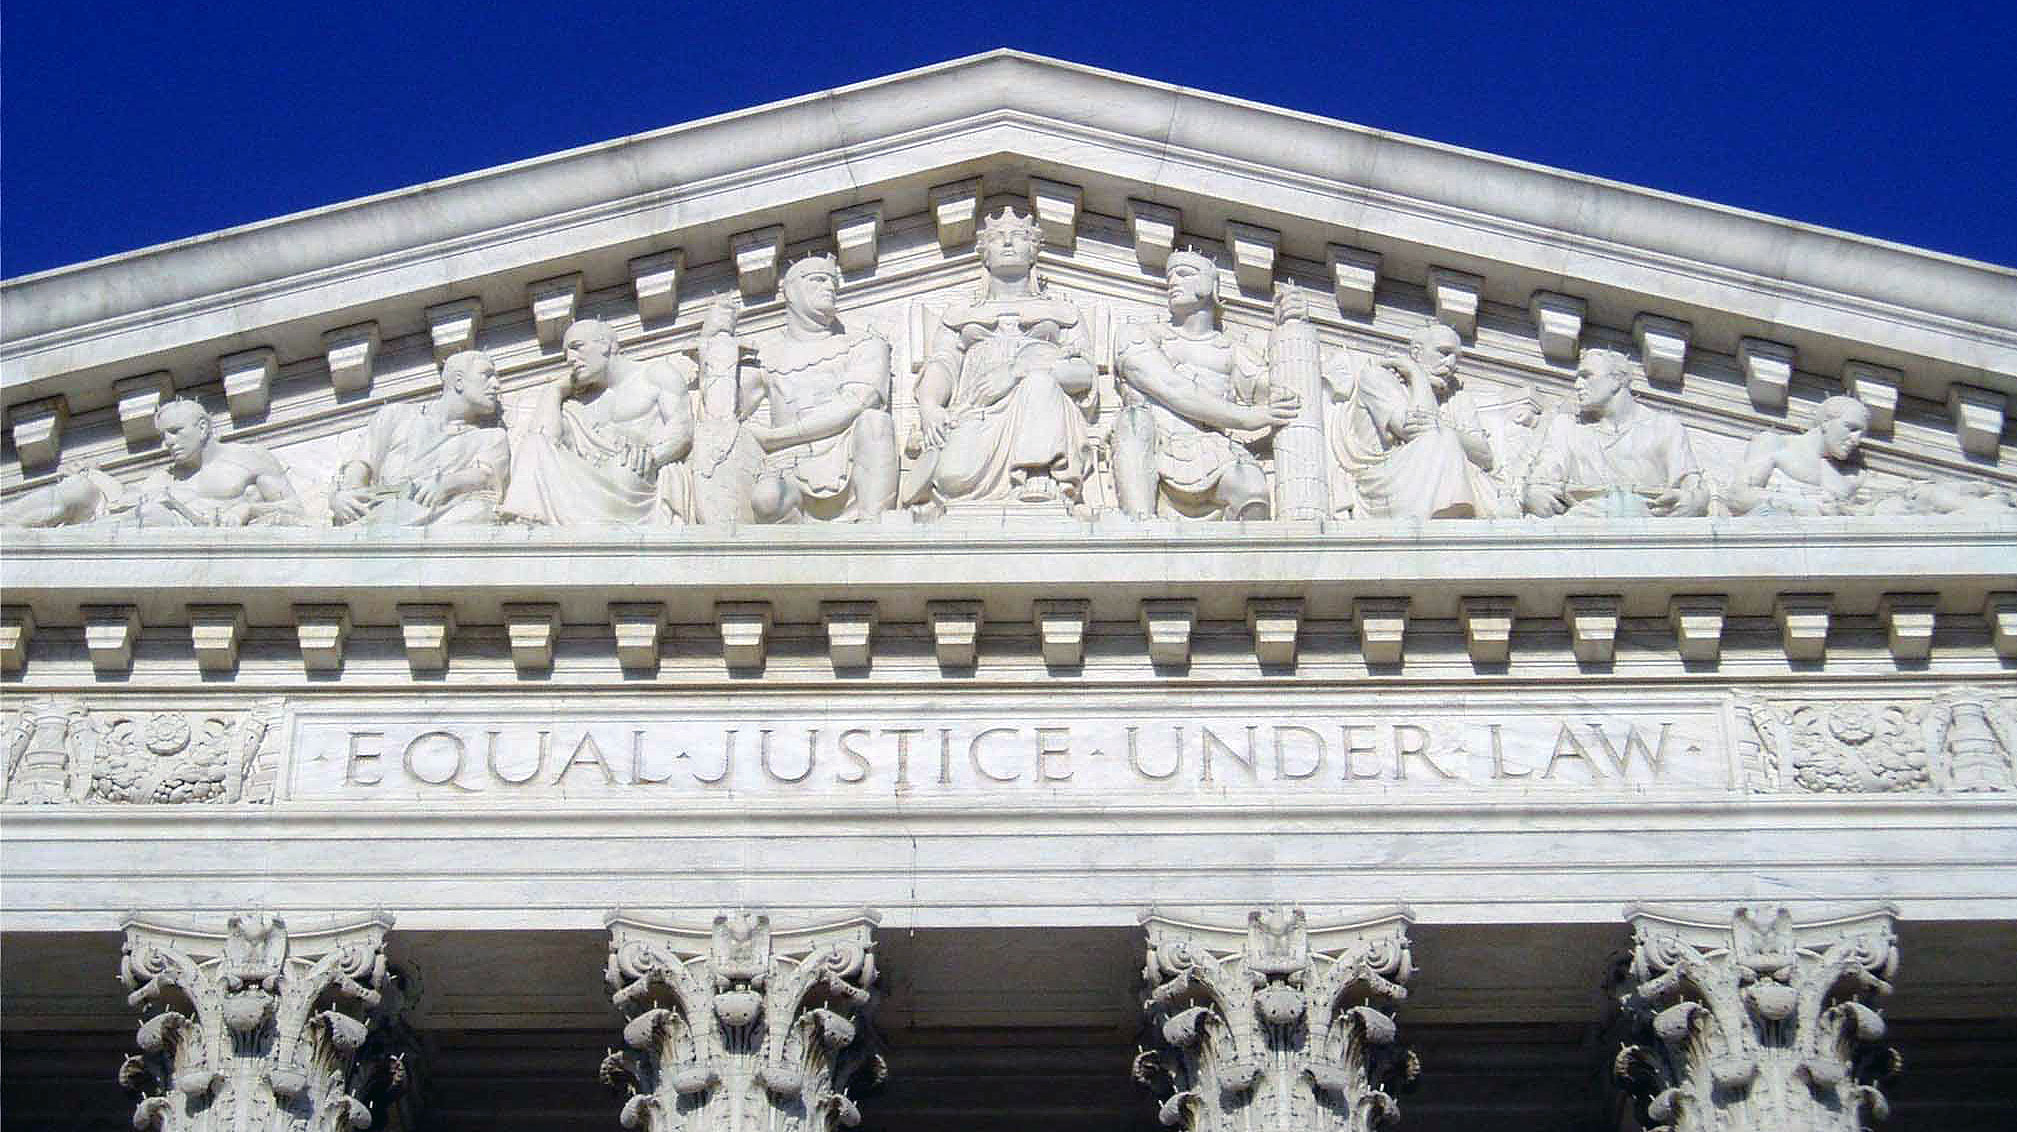 The pediment and frieze of the U.S. Supreme Court building, bearing the inscription: Equal Justice Under Law